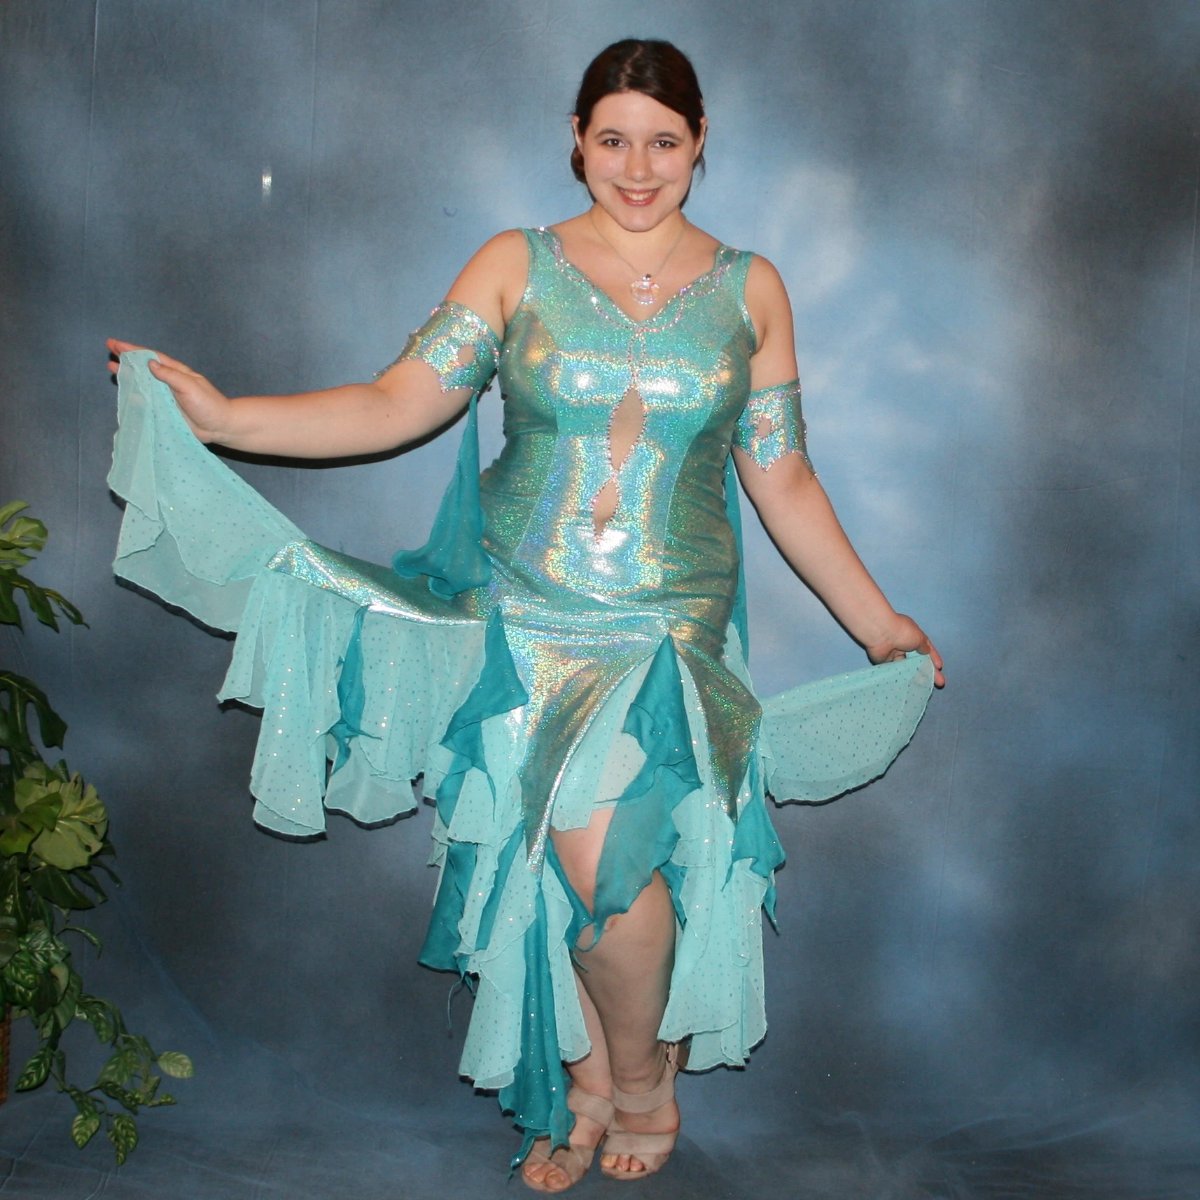 Crystal's Creations Aqua Latin/rhythm dress created of gorgeous hologram base with flounces of aqua champagne sequin chiffon & teal glitter chiffon, embellished with CAB Swarovski stone work, with strap detailing on back. I envision this magical dress a gorgeous rumba, bolero or even a great solo dress for a waltz or foxtrot….or for an all around division.